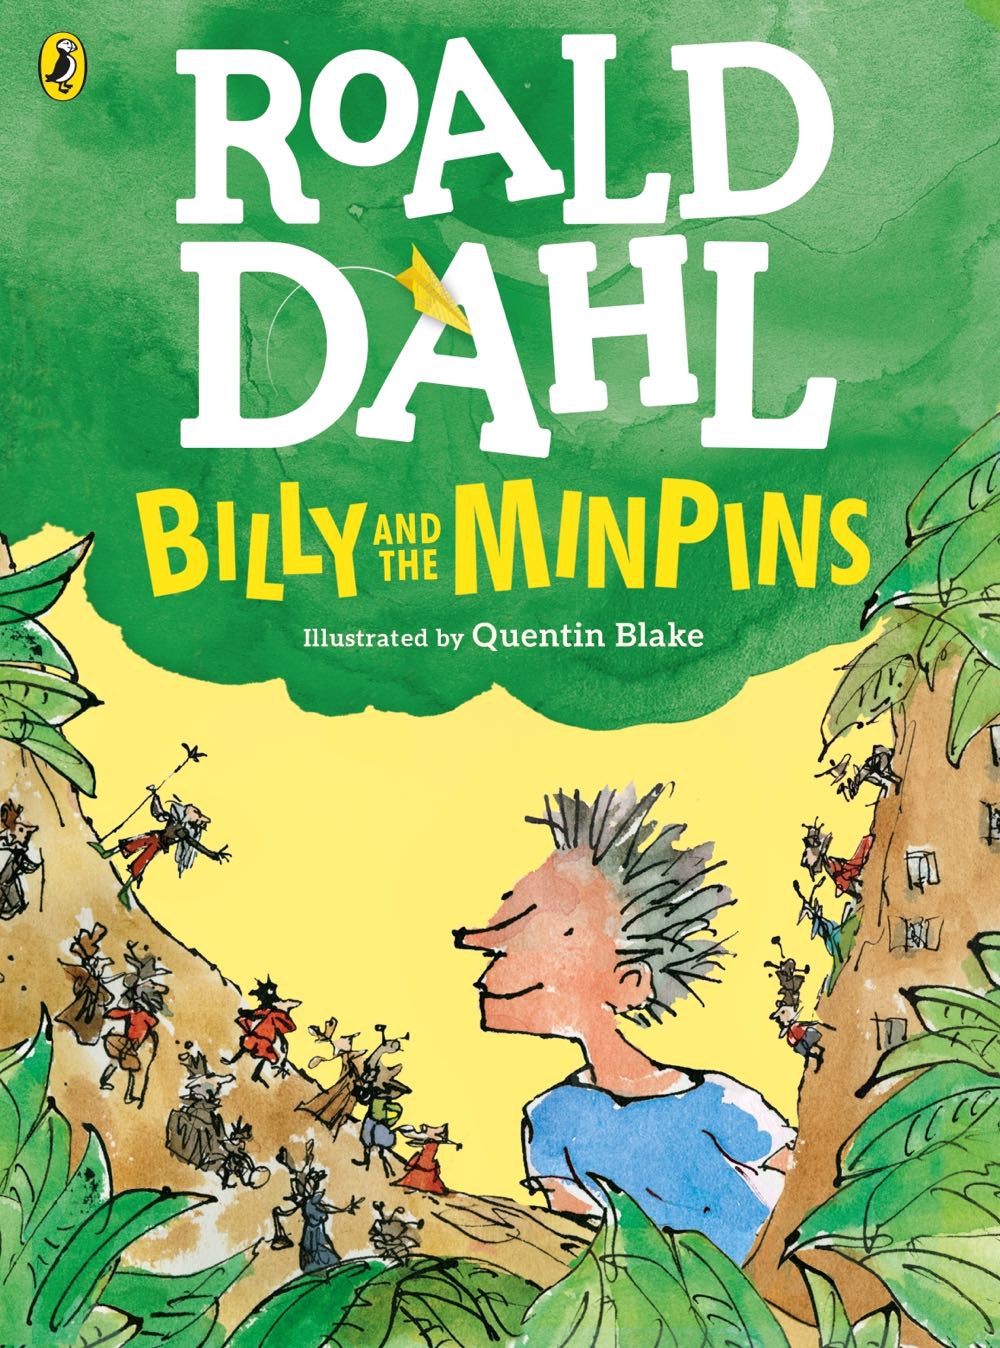 Billy and the Minpins - Roald Dahl (Puffin - Paperback) book collectible [Barcode 9780241377284] - Main Image 1